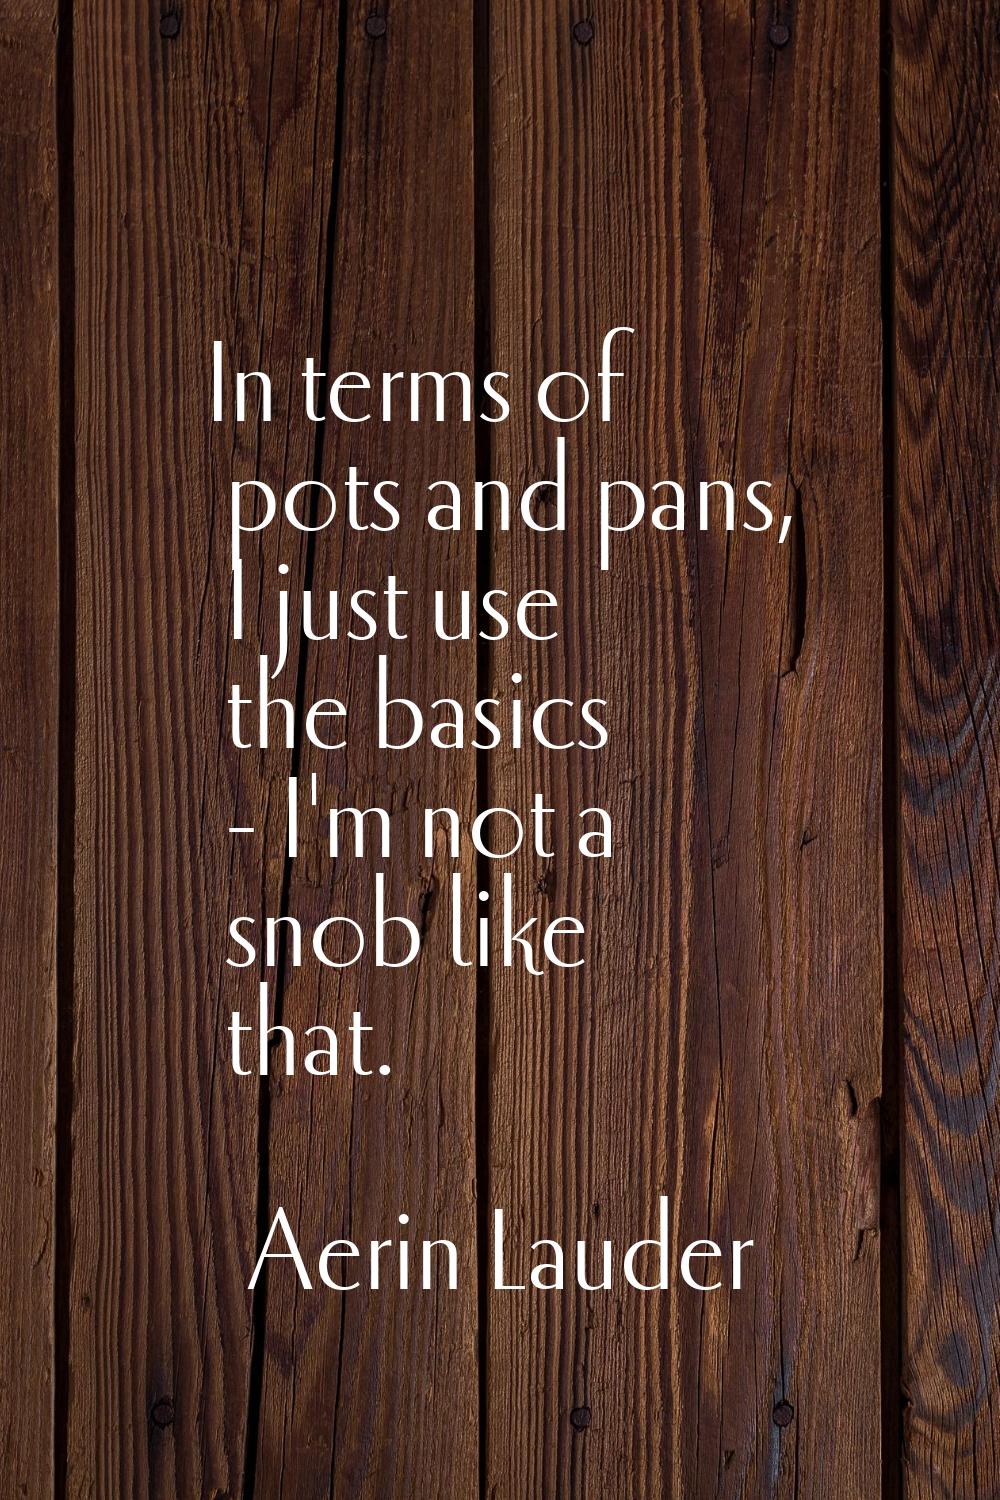 In terms of pots and pans, I just use the basics - I'm not a snob like that.